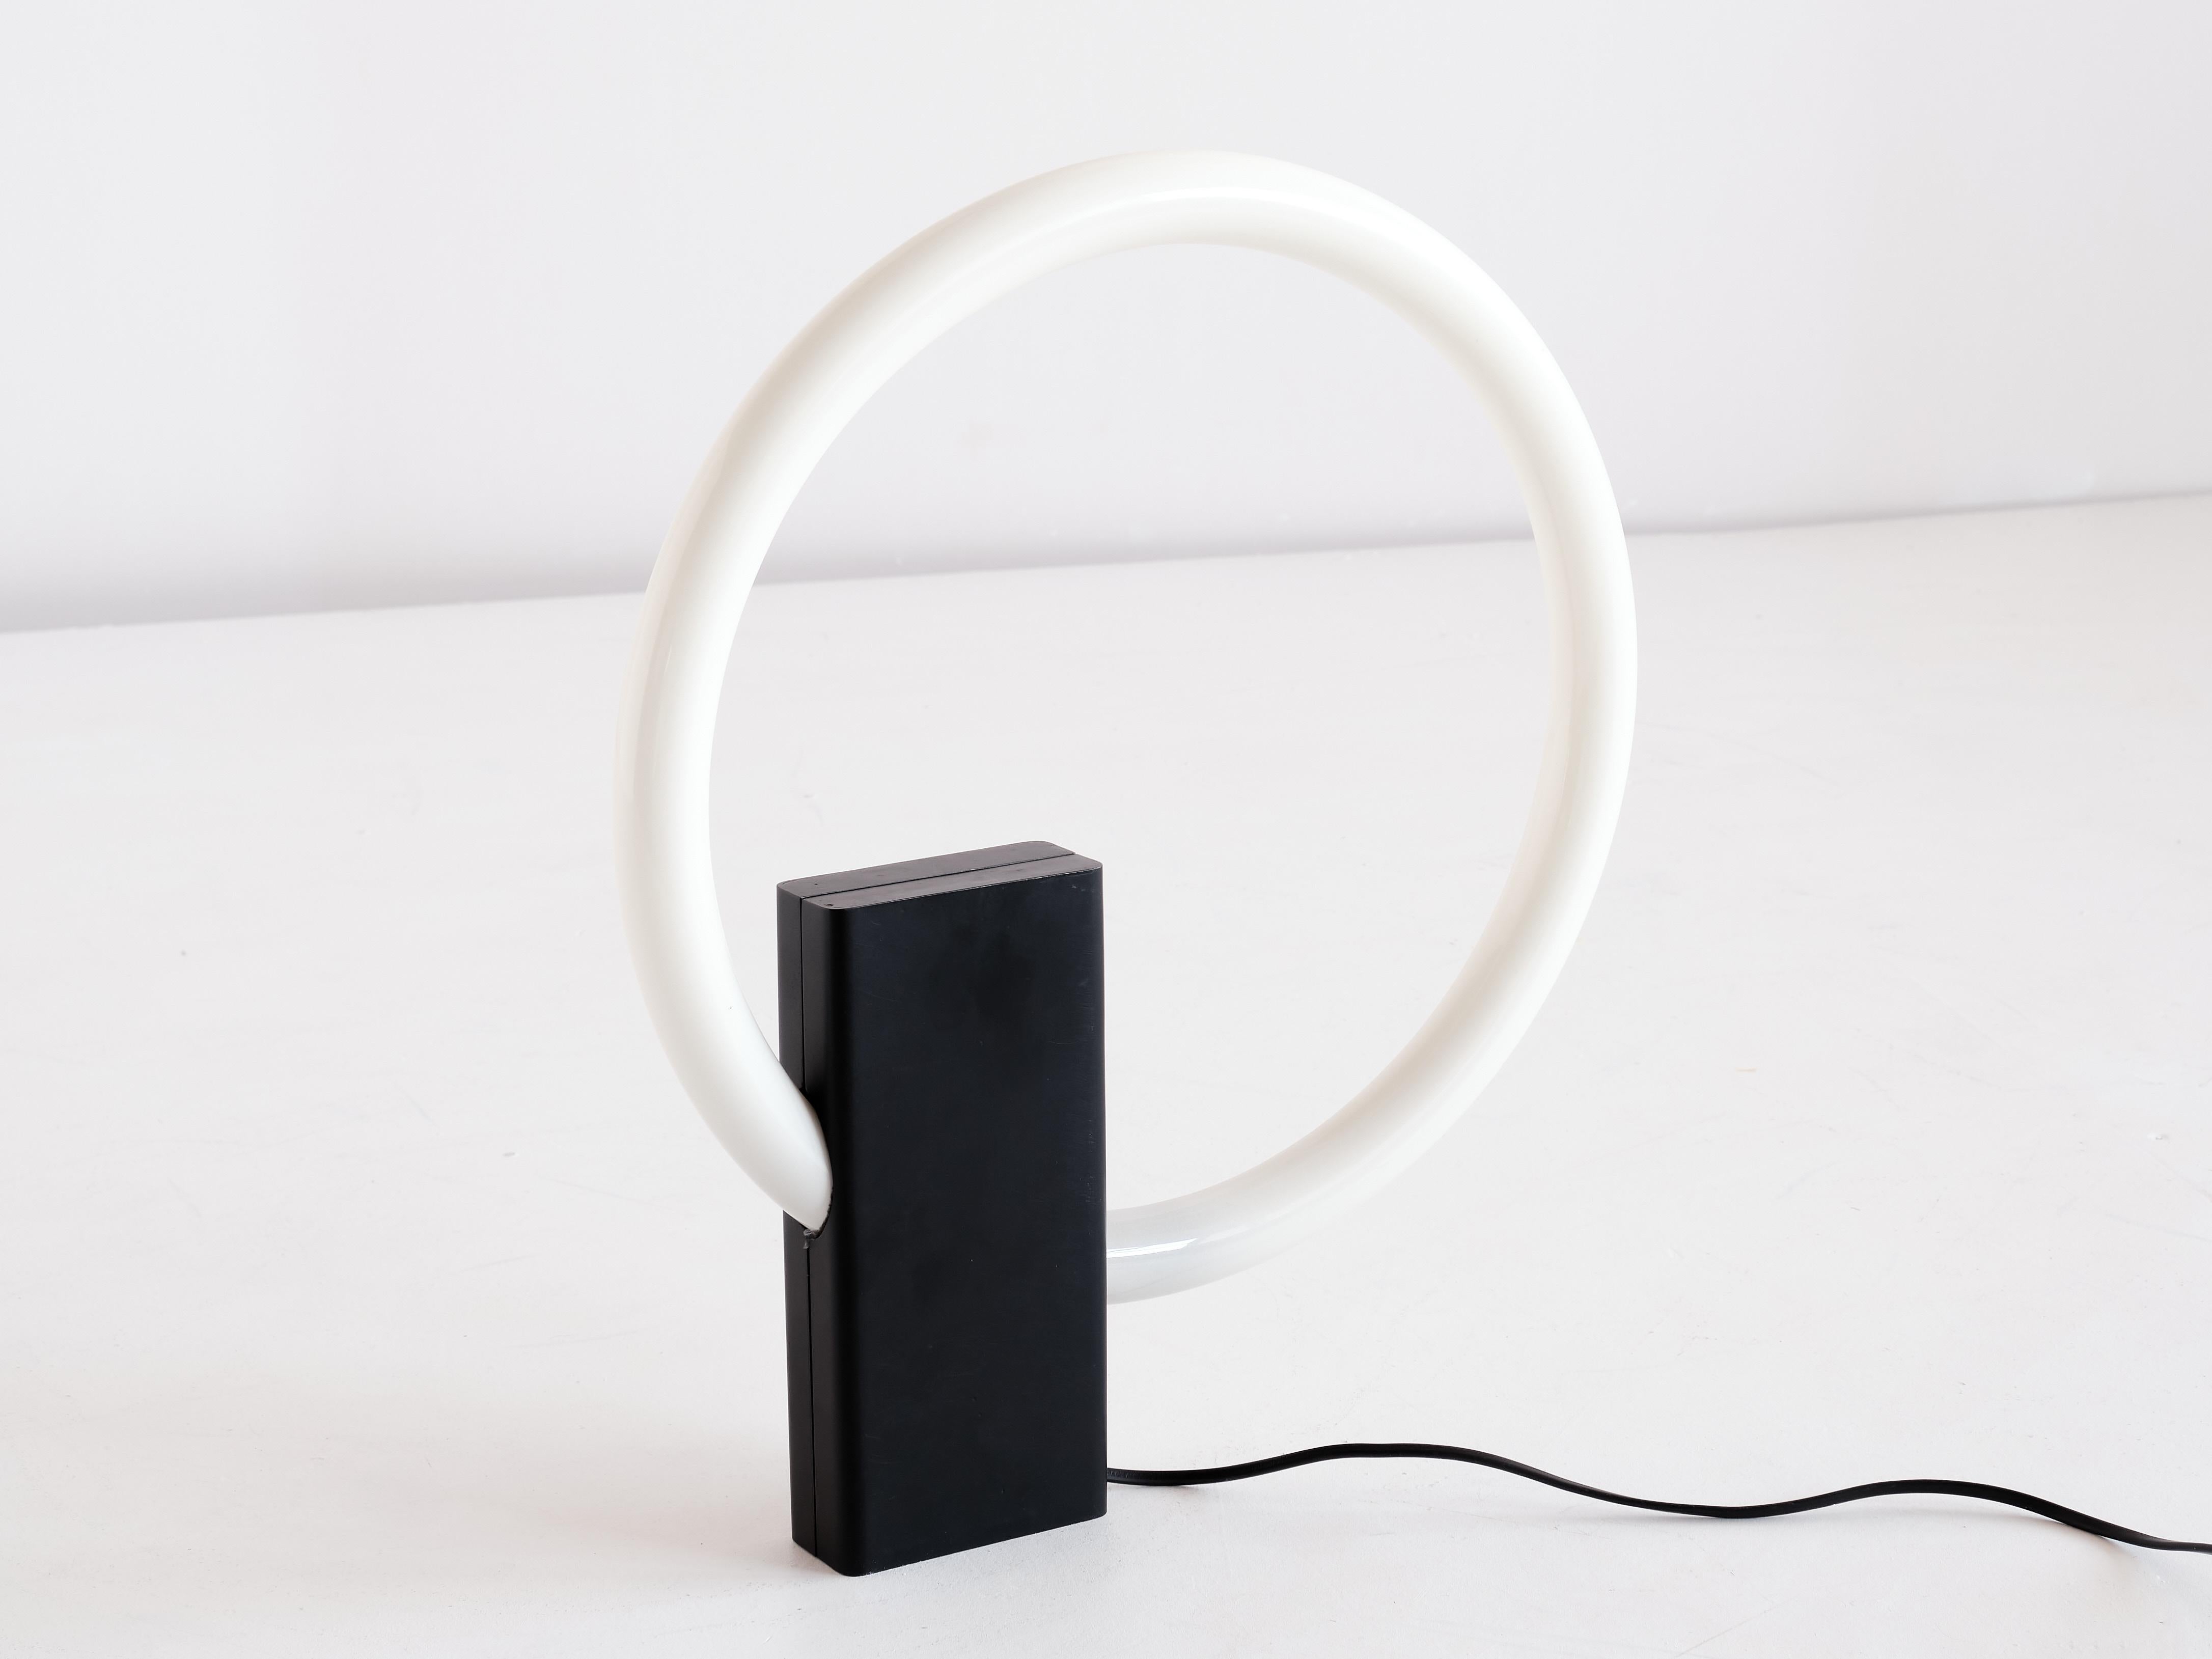 Minimalist Circular Tube Table Lamp with Black Steel Base, Netherlands, 1970s For Sale 3